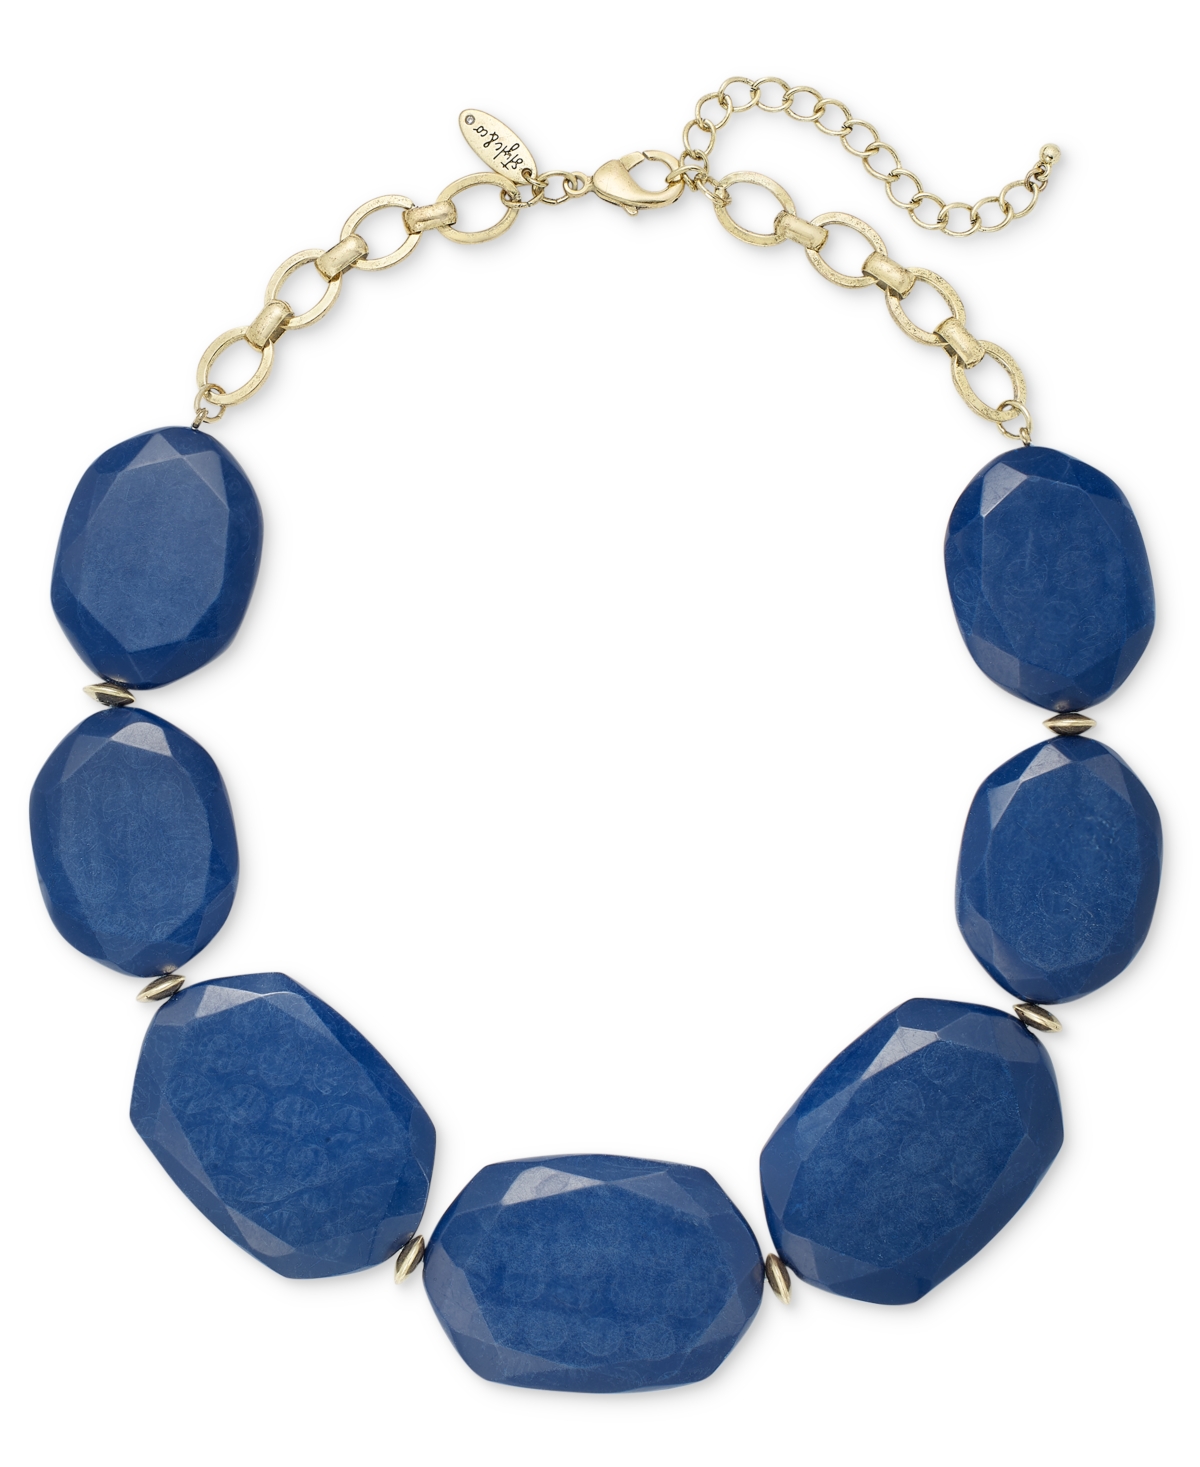 Gold-Tone Gemstone Statement Necklace, 19" + 3" extender, Created for Macy's - Brown